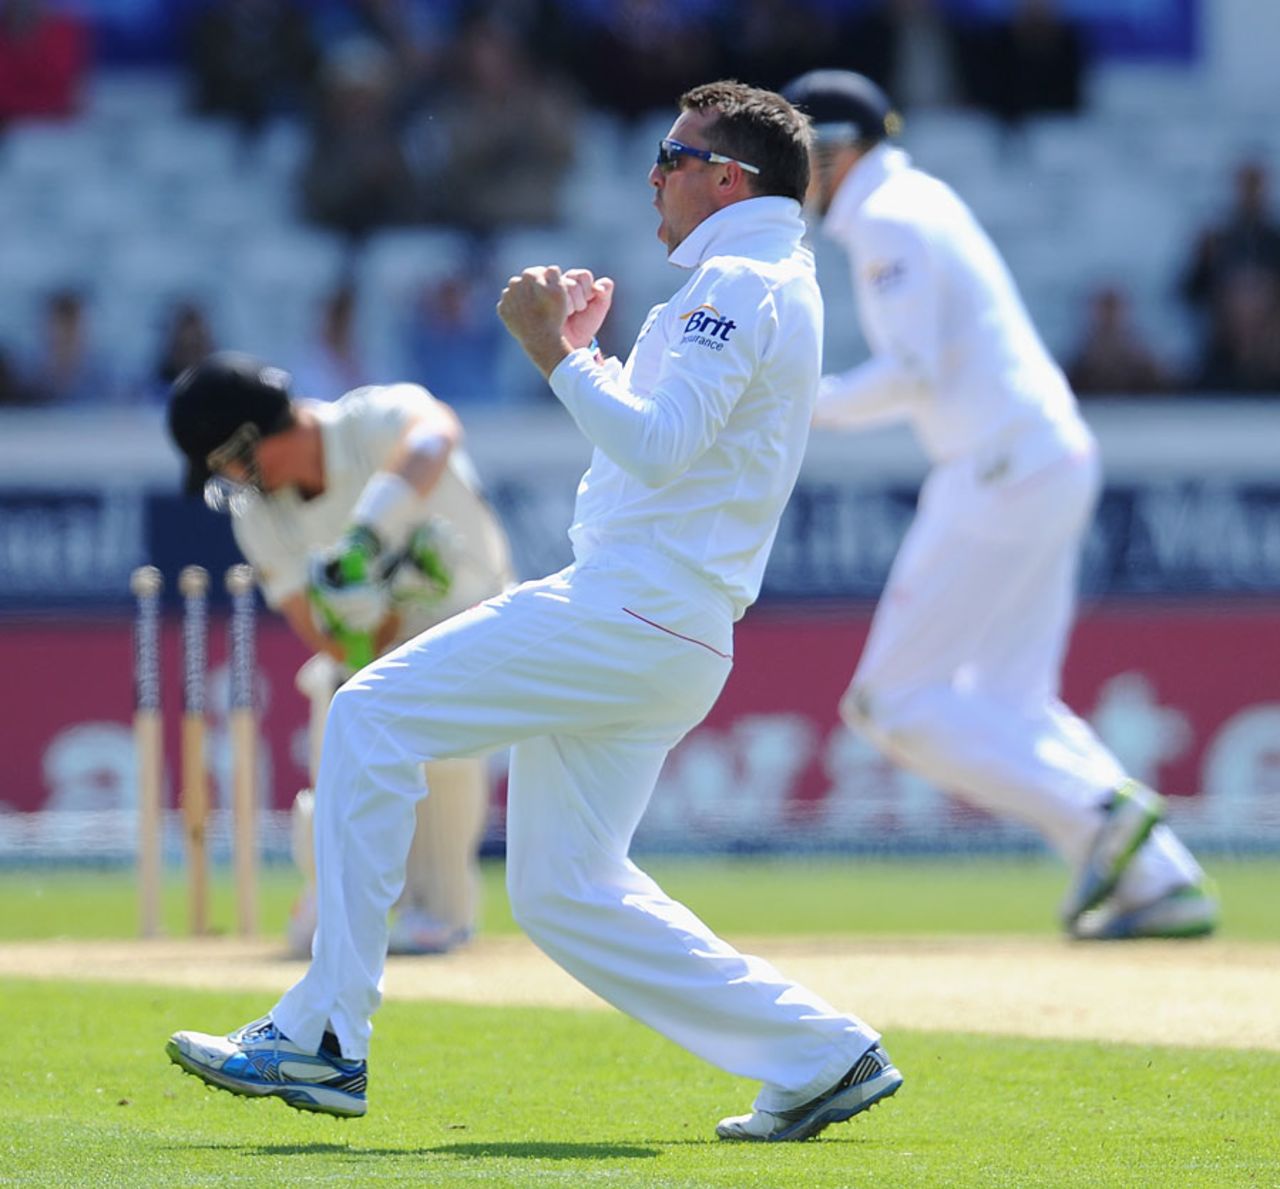 Graeme Swann enjoys another wicket, England v New Zealand, 2nd Investec Test, Headingley, 3rd day, May 26, 2013